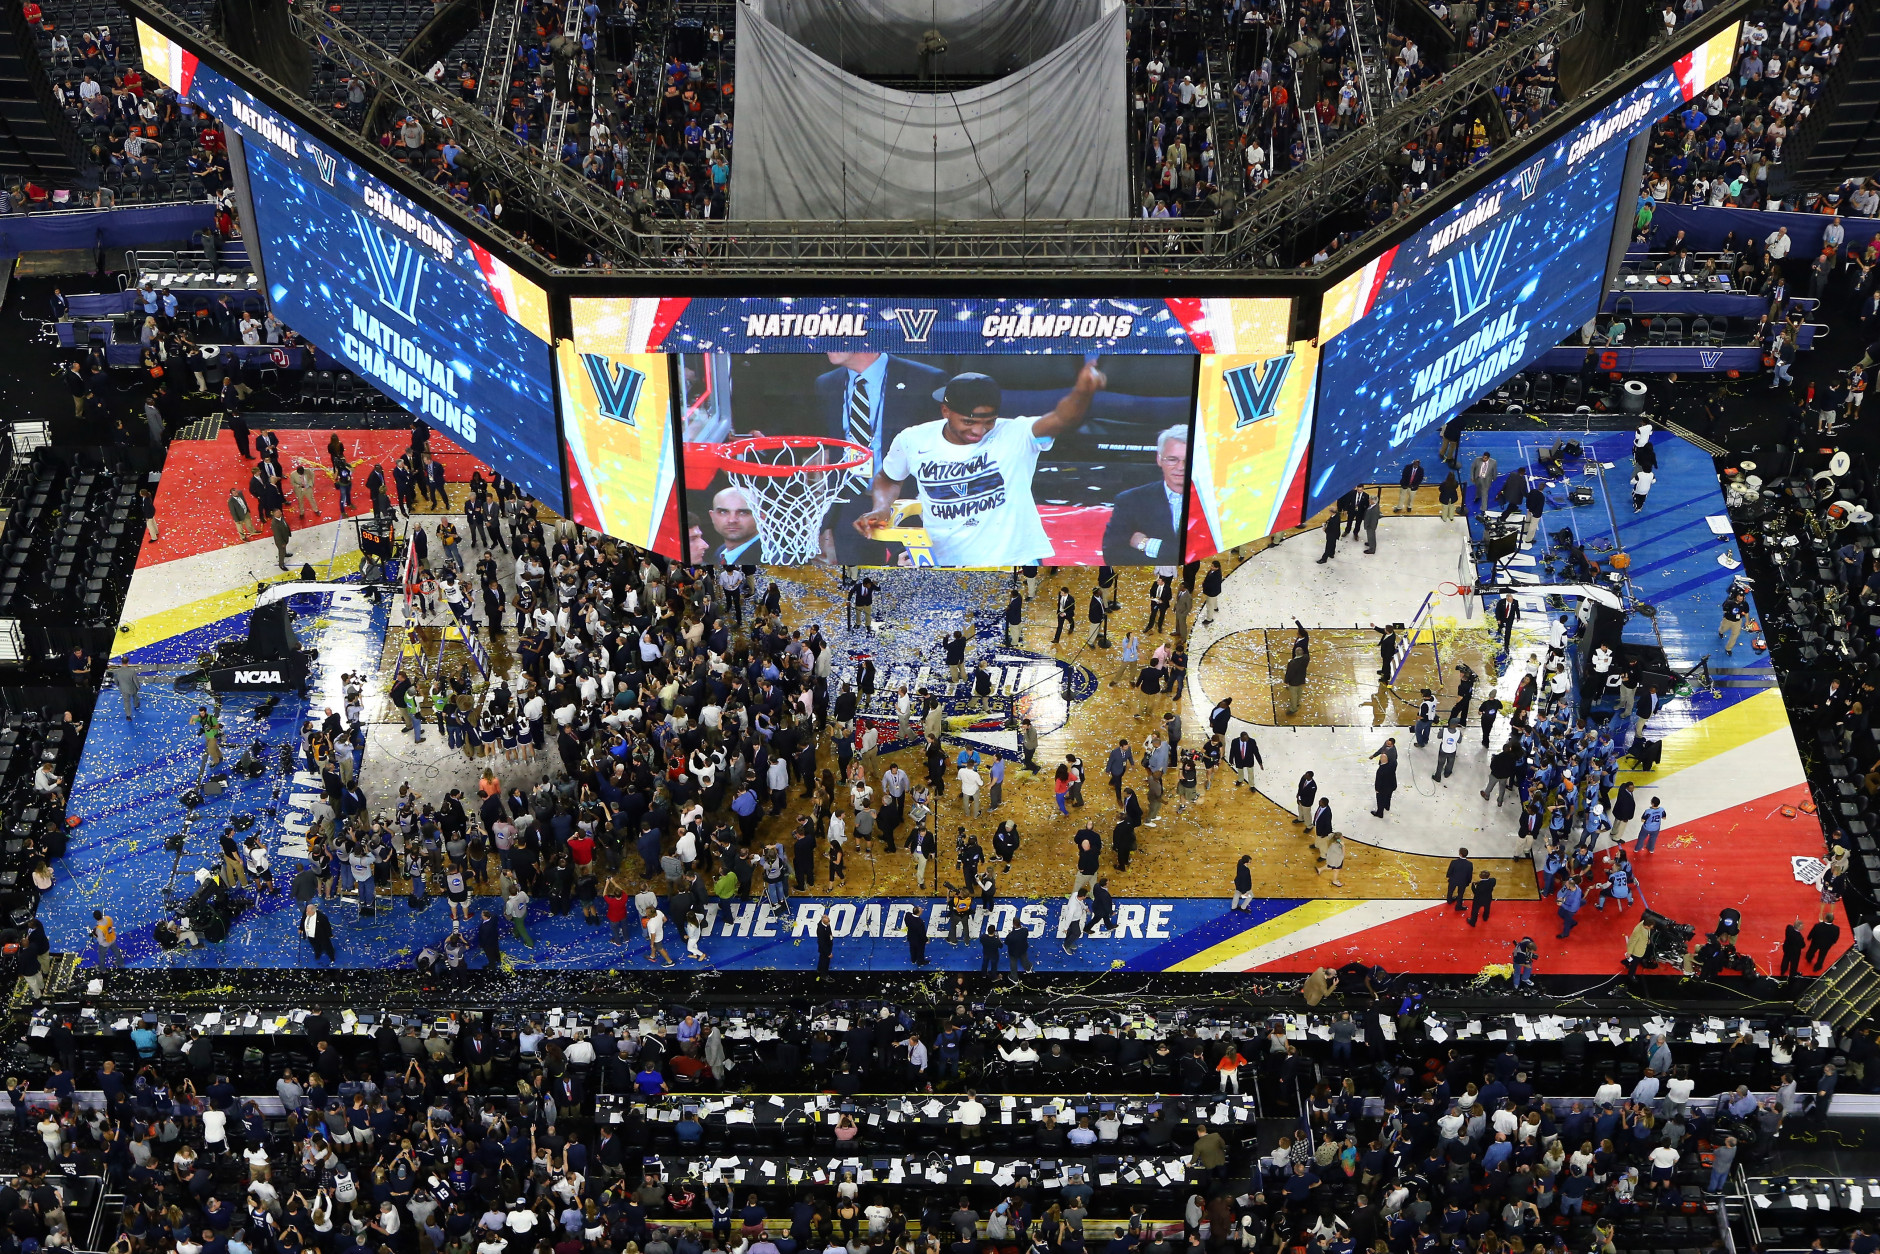 HOUSTON, TEXAS - APRIL 04:  A general view as the Villanova Wildcats celebrate defeating the North Carolina Tar Heels 77-74 to win the 2016 NCAA Men's Final Four National Championship game at NRG Stadium on April 4, 2016 in Houston, Texas.  (Photo by Ronald Martinez/Getty Images)